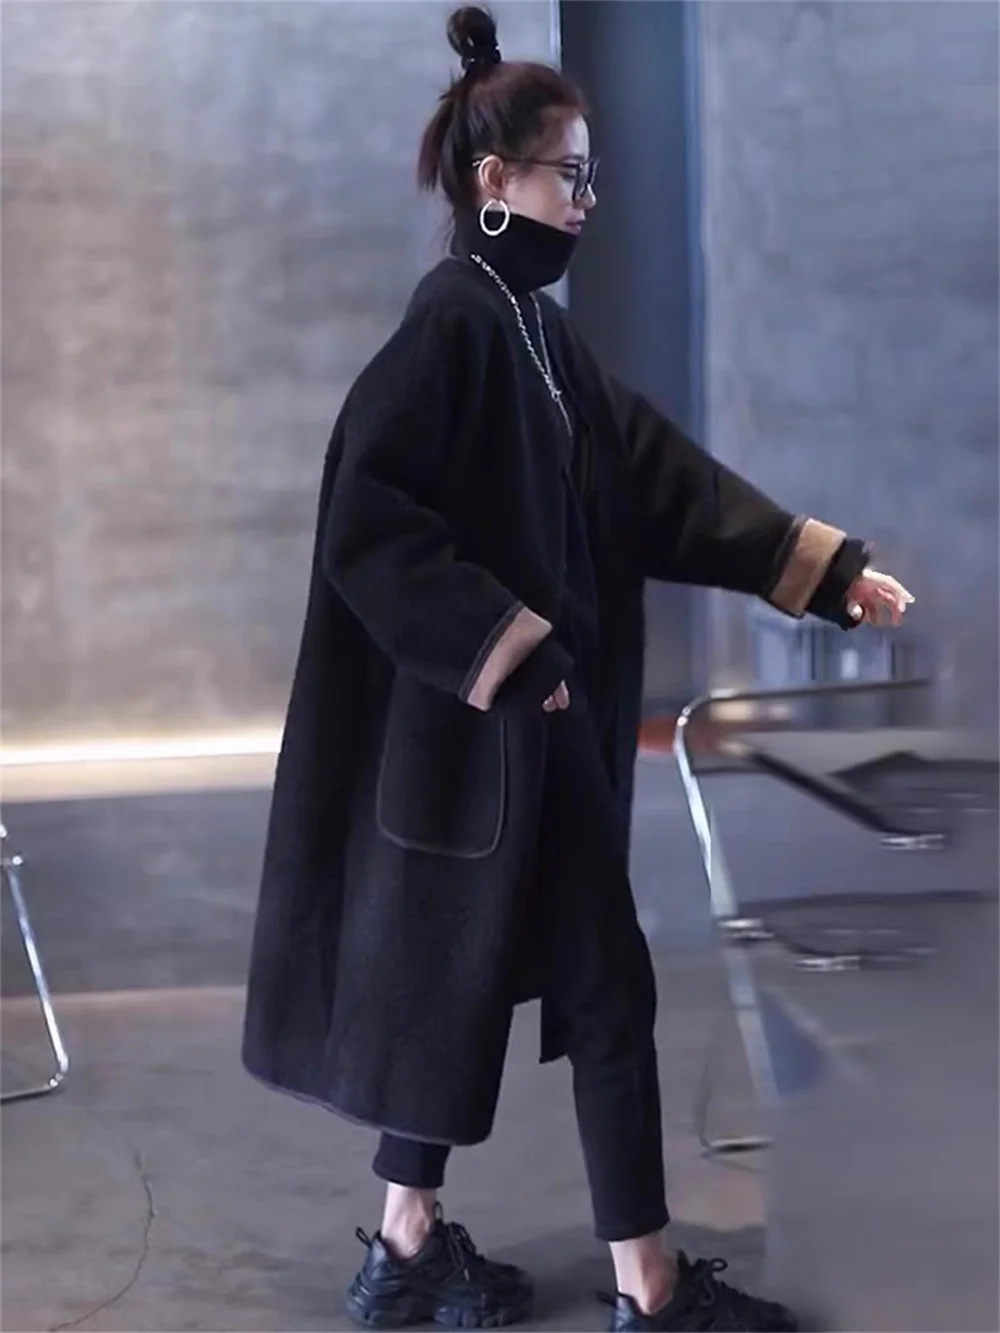 Korean Drama Female Lead Wears a Black Lamb Woolen Mid Length Small Fragrant Coat in Autumn  Winter, and a New Year's robe 13pcs lot 900m t soldering iron tips black lead free solder tips sting bga soldering station rework tools